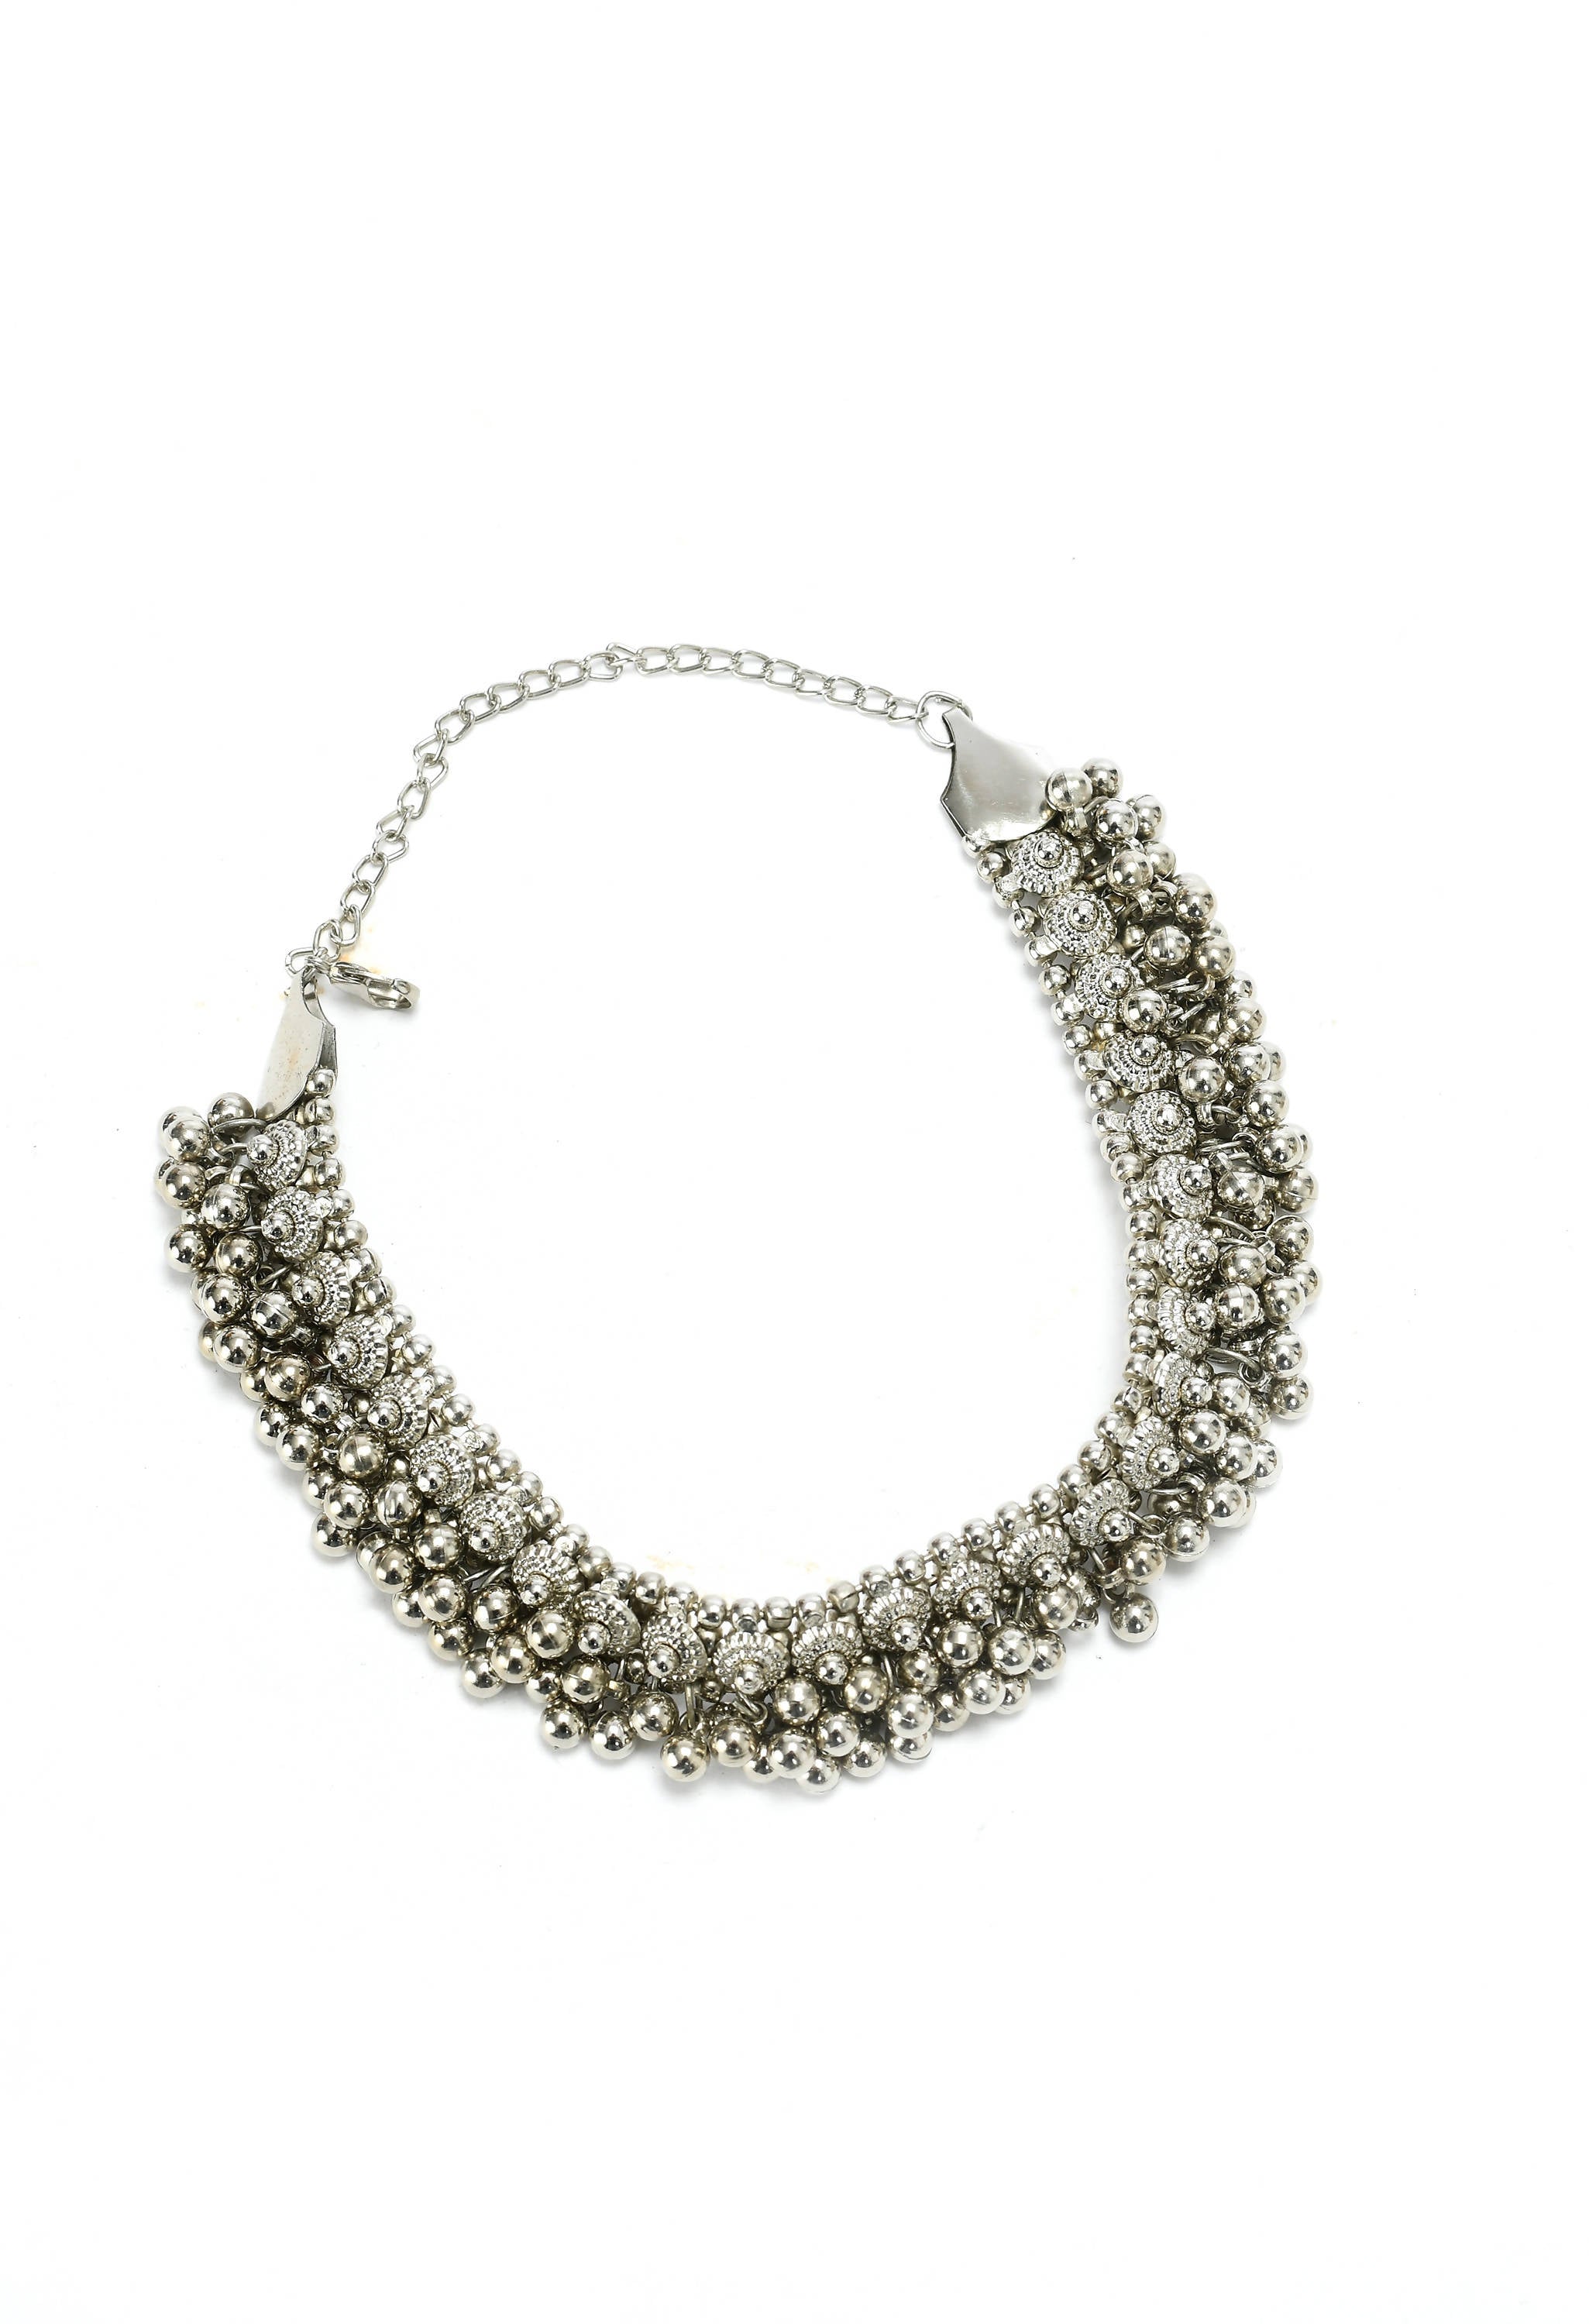 Trendia Silver-Plated Choker Necklace with Earrings Jkms_093